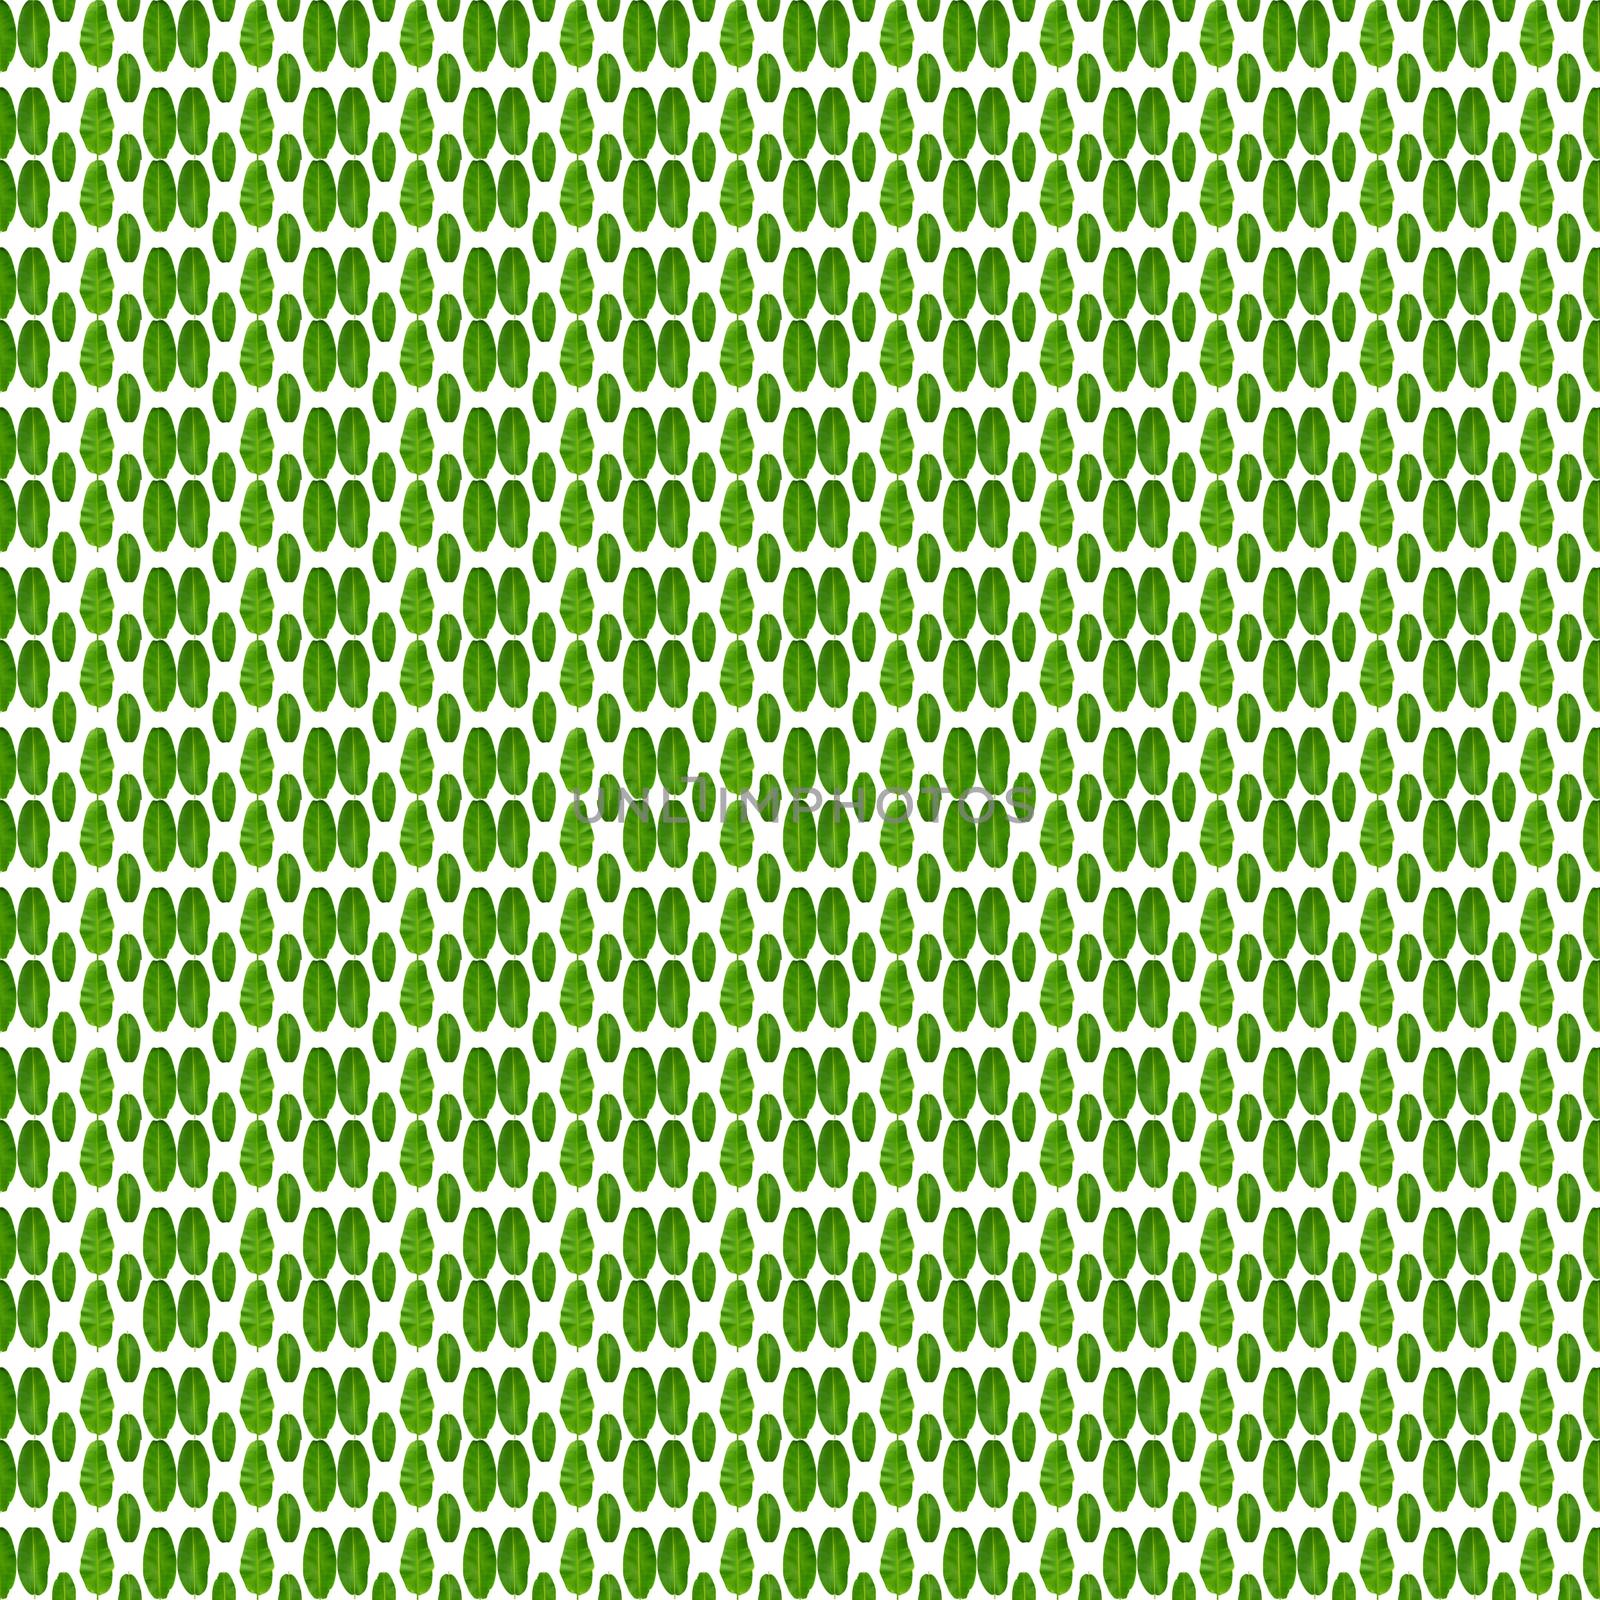 Seamless pattern of green banana leaves on white background. Plants seamless pattern concept.